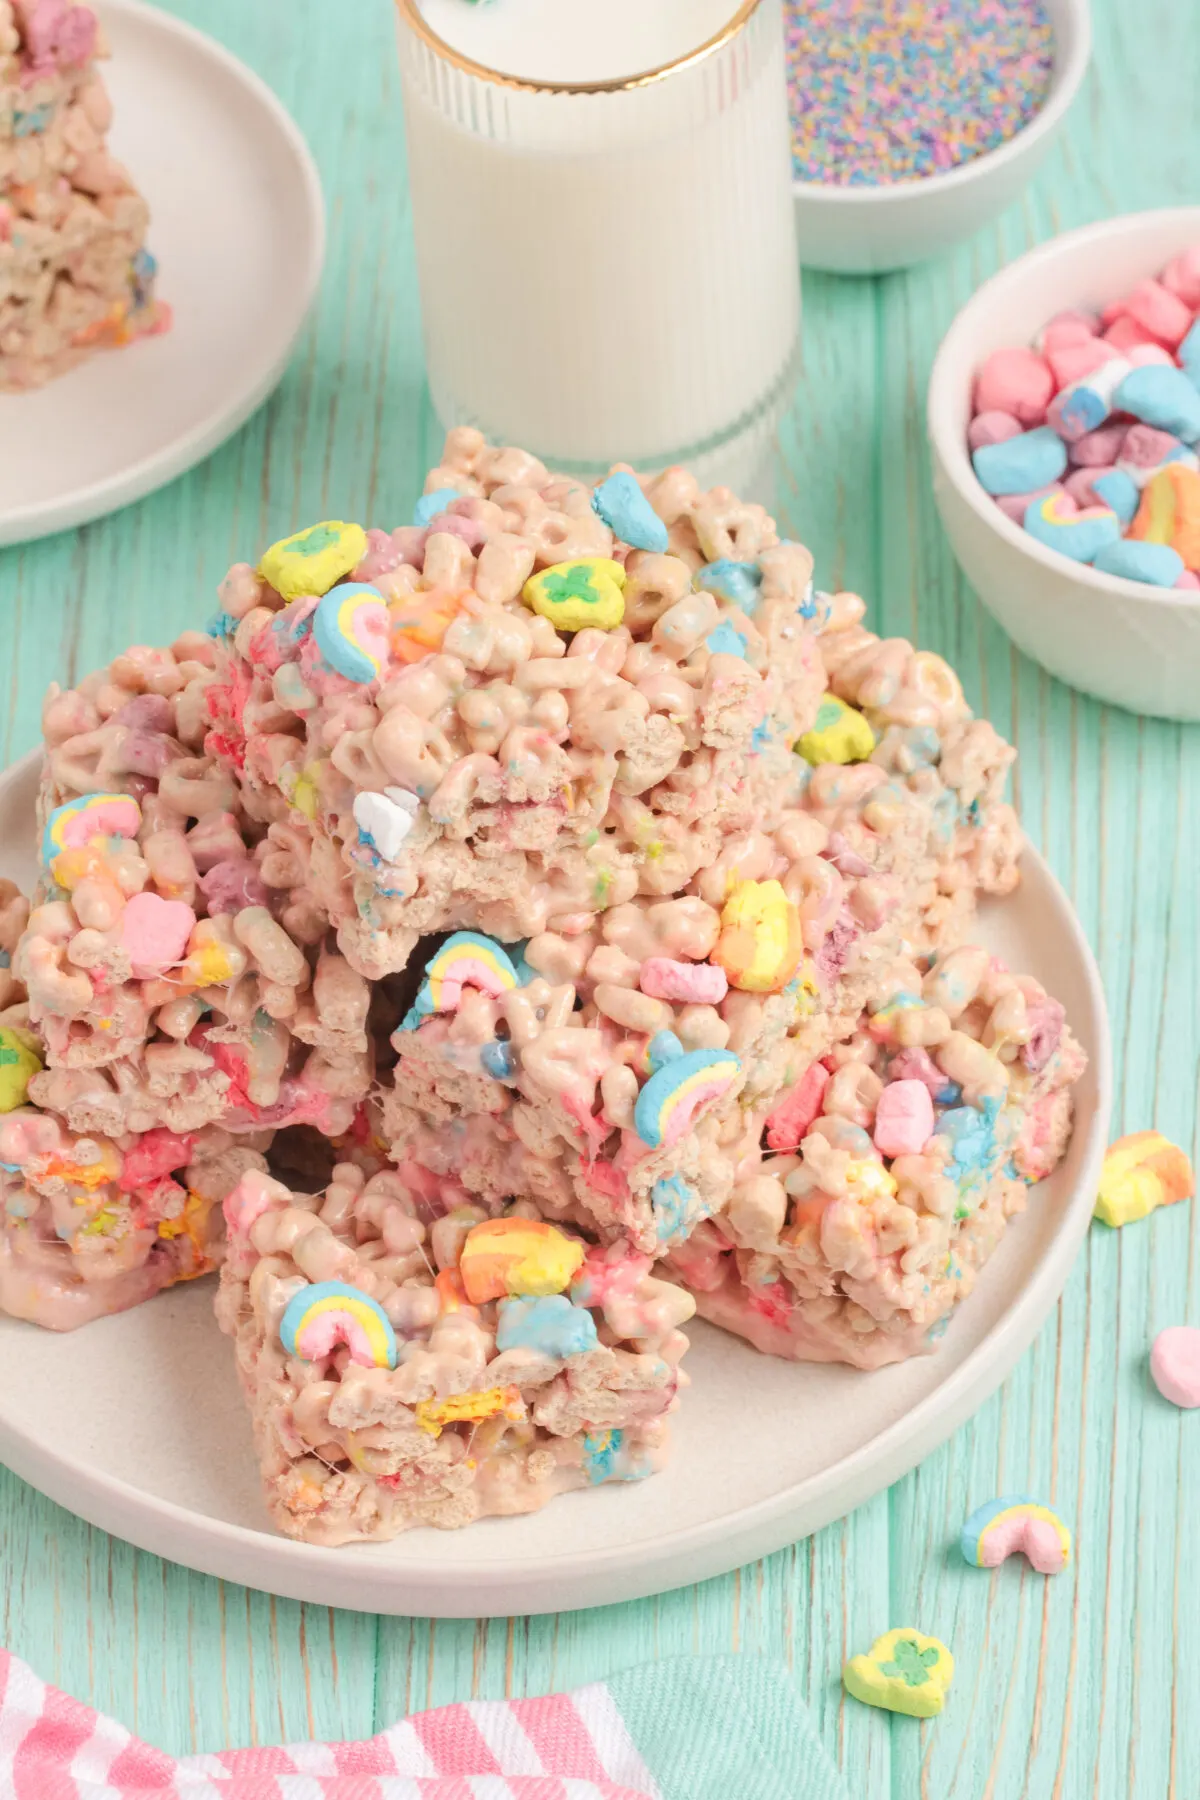 Turn your favourite cereal into a tasty snack with this easy Lucky charms treats recipe. Perfect for St. Patrick’s Day or any day of the year!